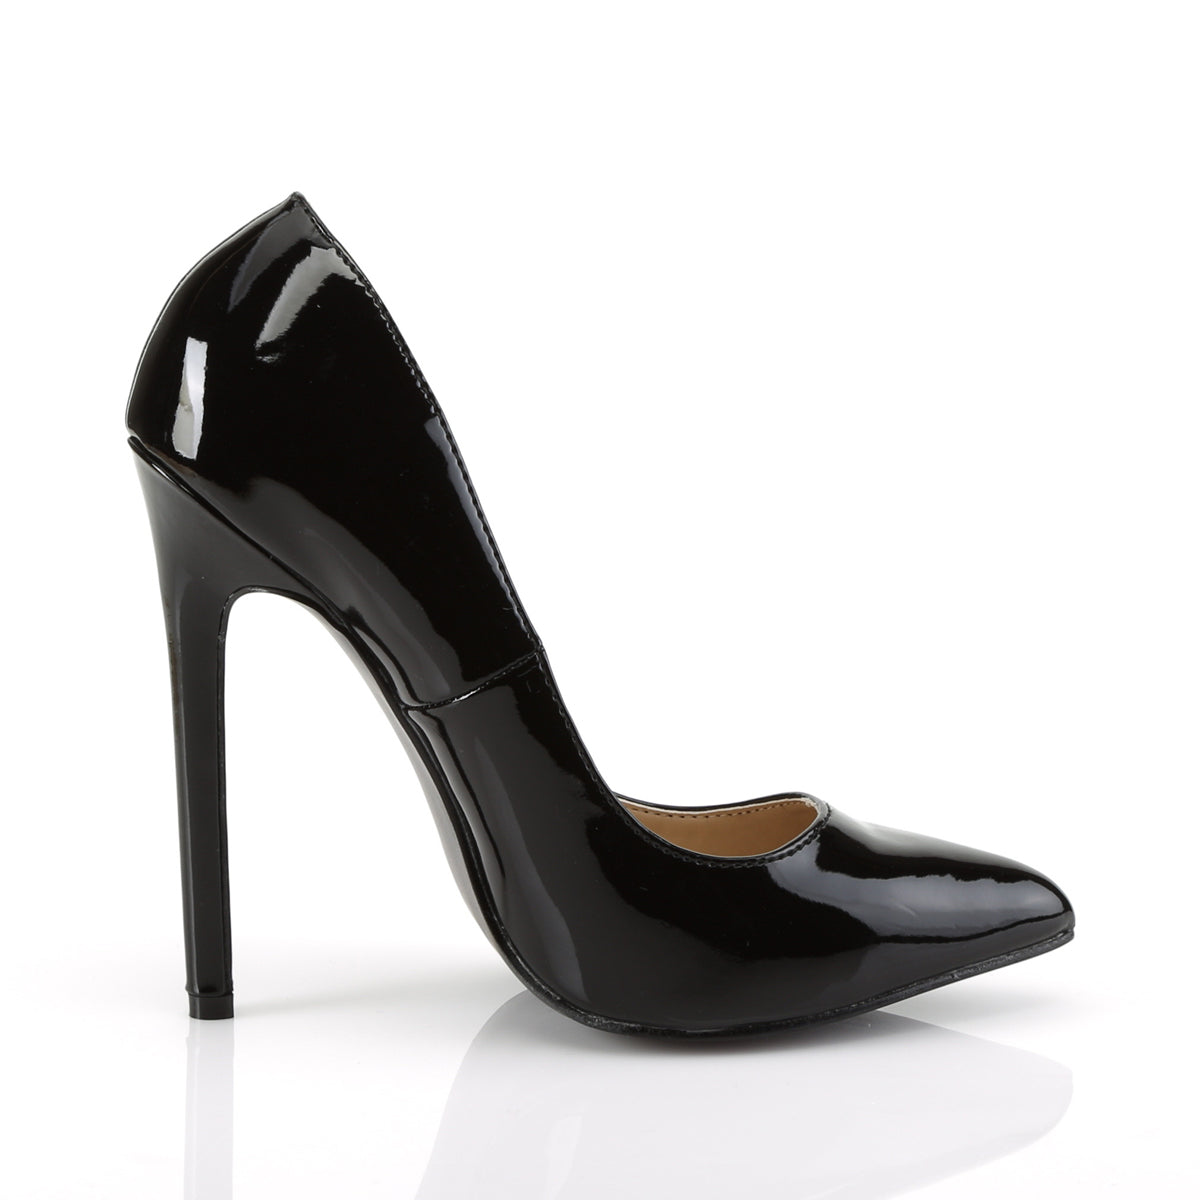 SEXY-20 Pleaser Shoes 5" Heel Black Patent Fetish Footwear-Pleaser- Sexy Shoes Fetish Heels